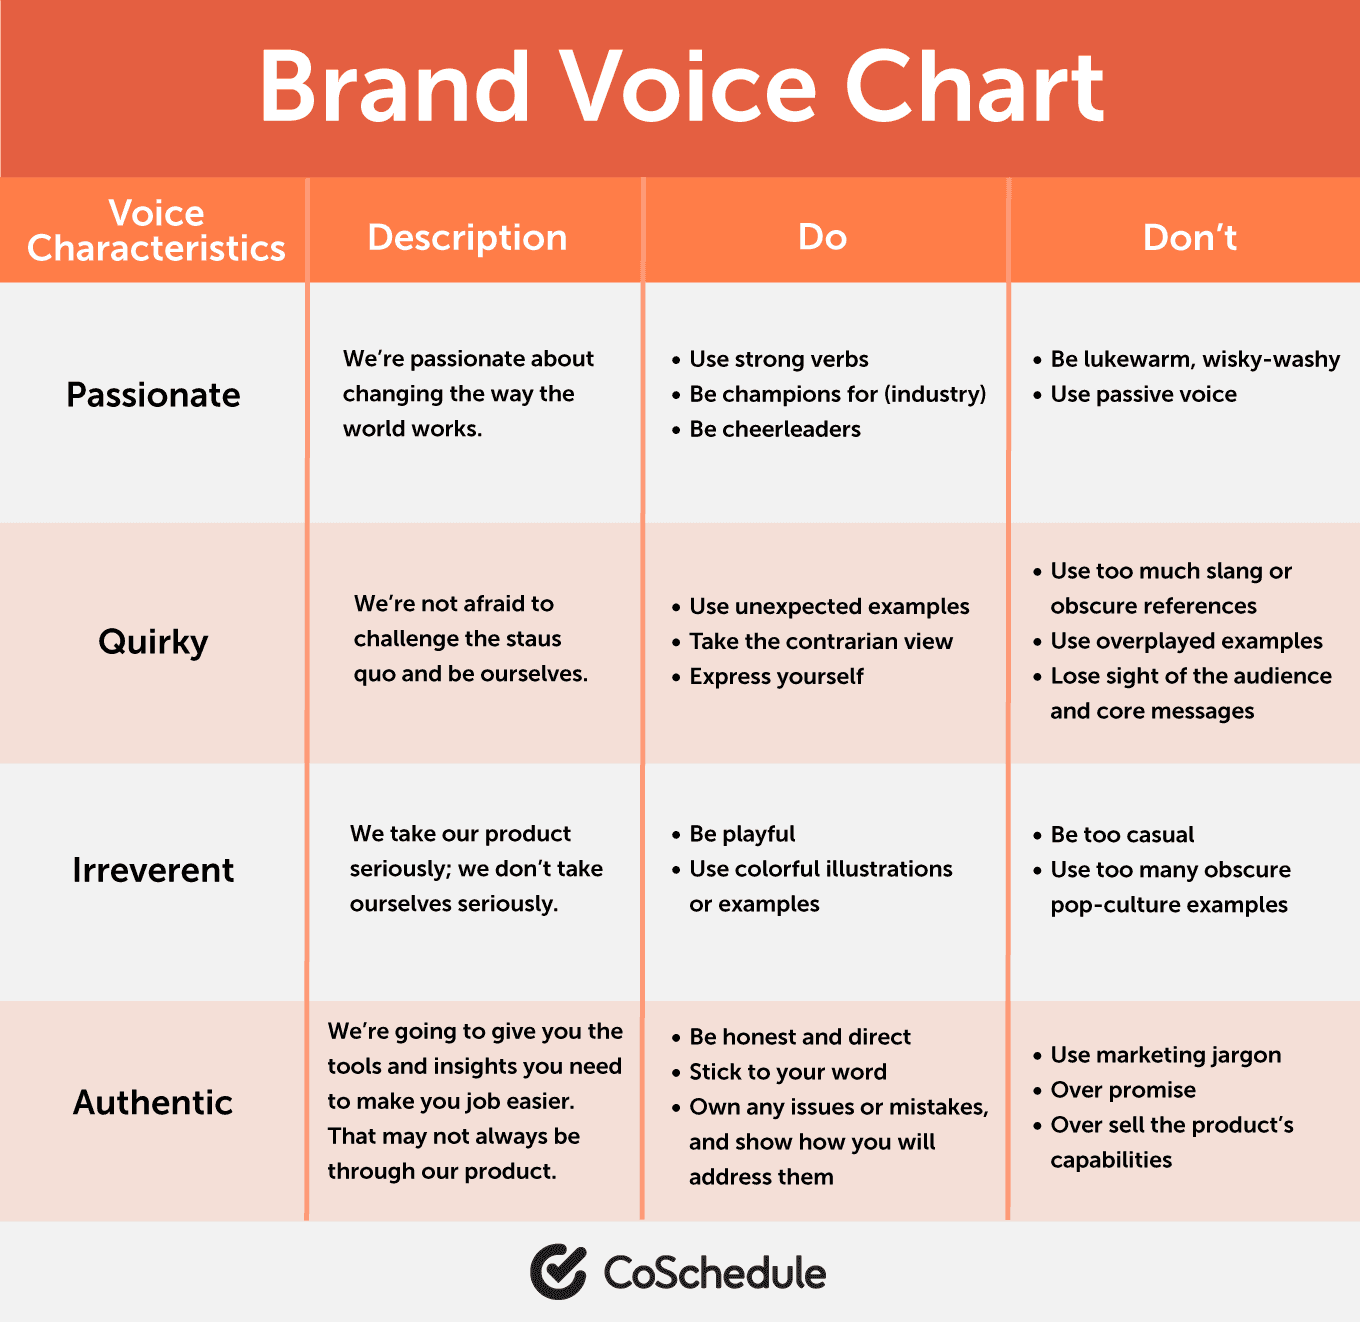 Brand voice chart with voice characteristics, description, and do's/don'ts